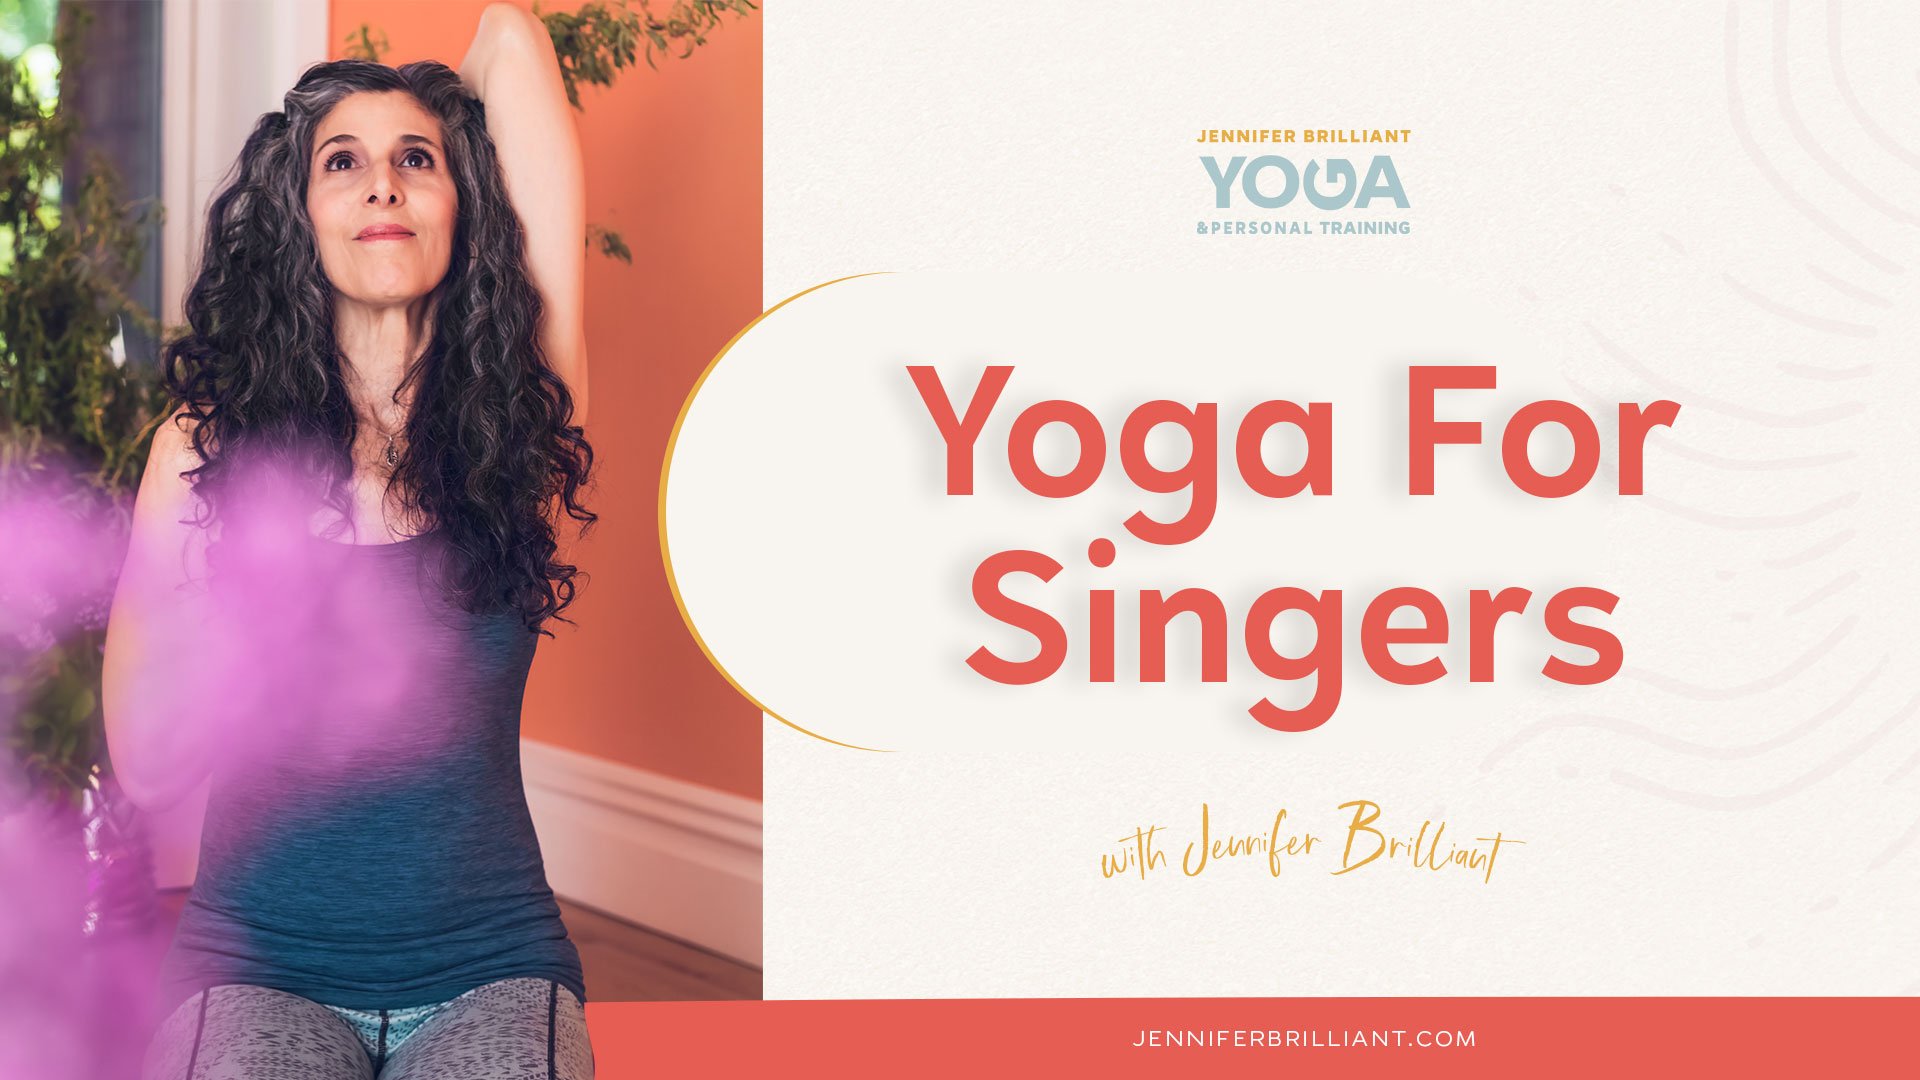 On-Demand Video Yoga For Singers